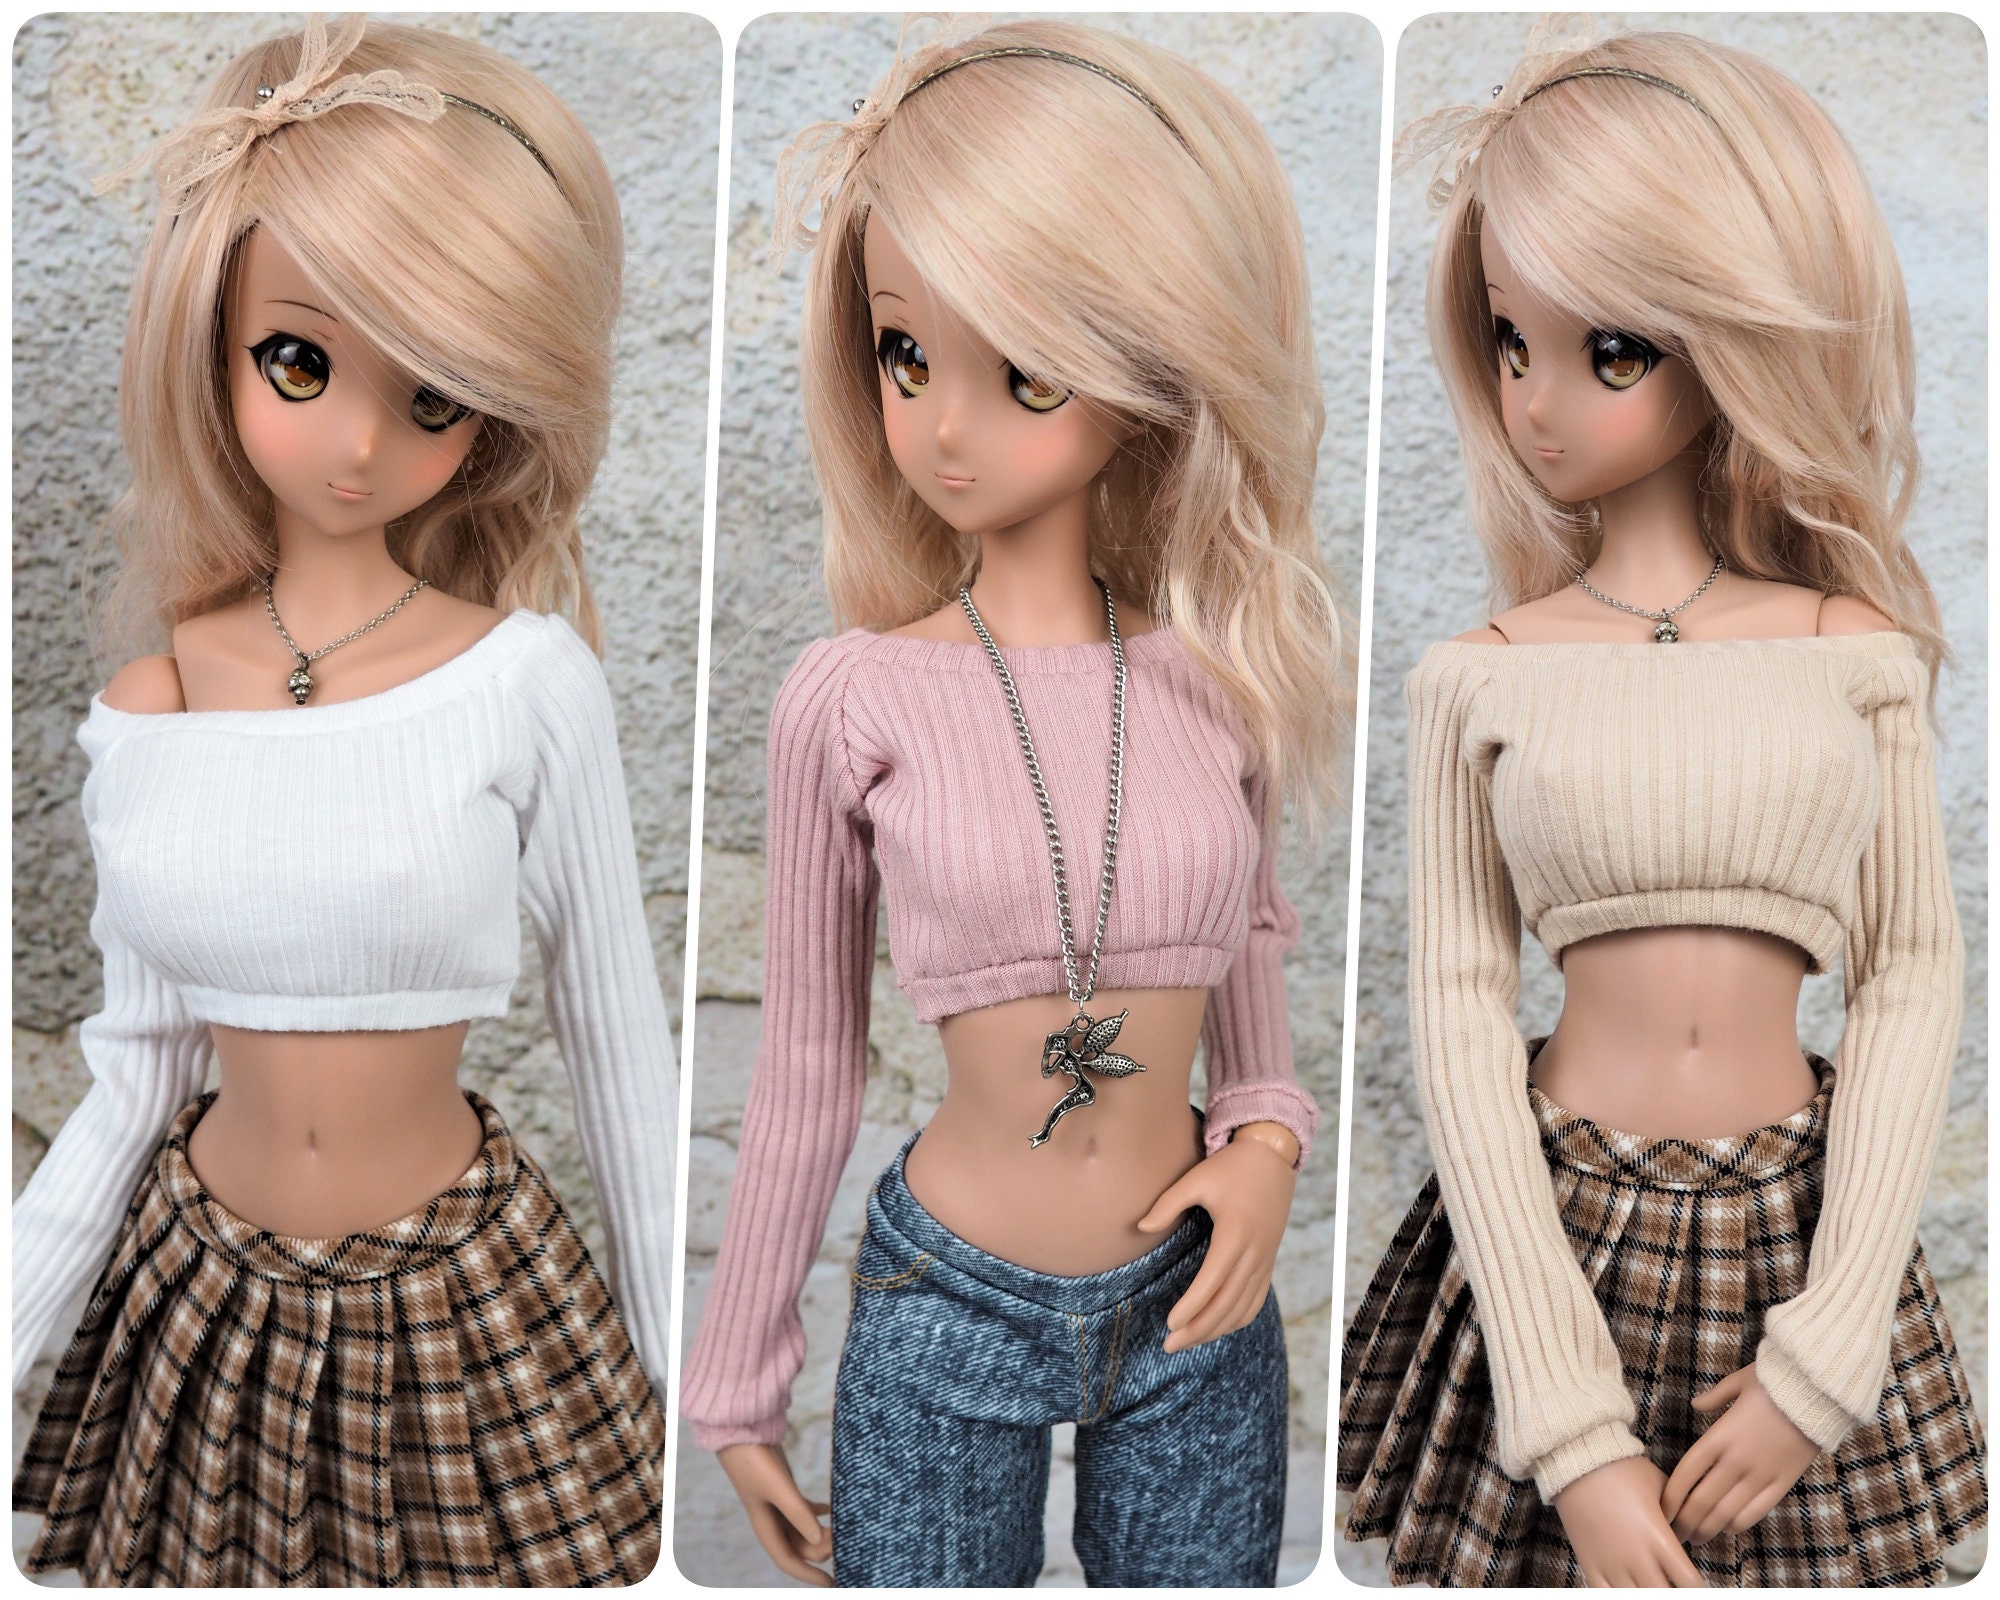 How much is a smart doll